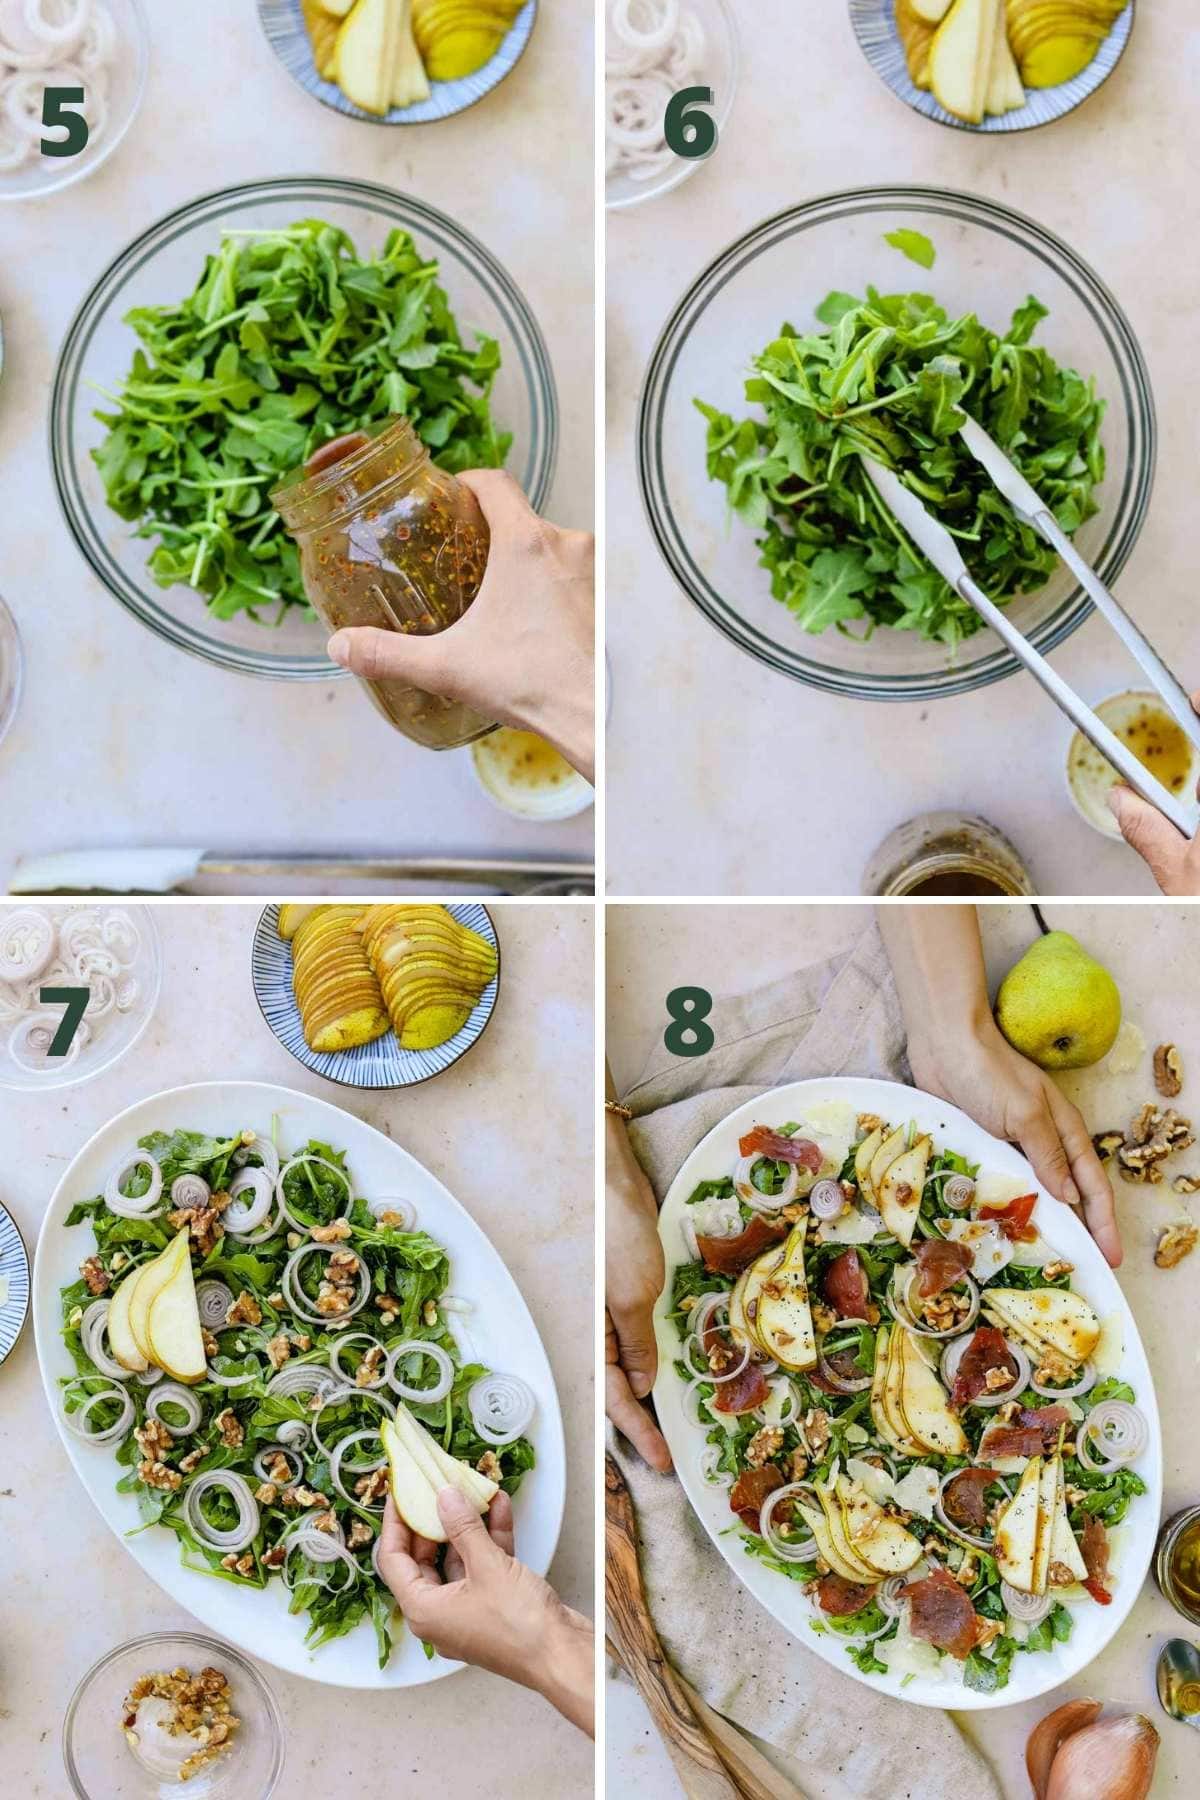 Instructions to make prosciutto and pear arugula salad, including tossing the salad and adding the toppings.